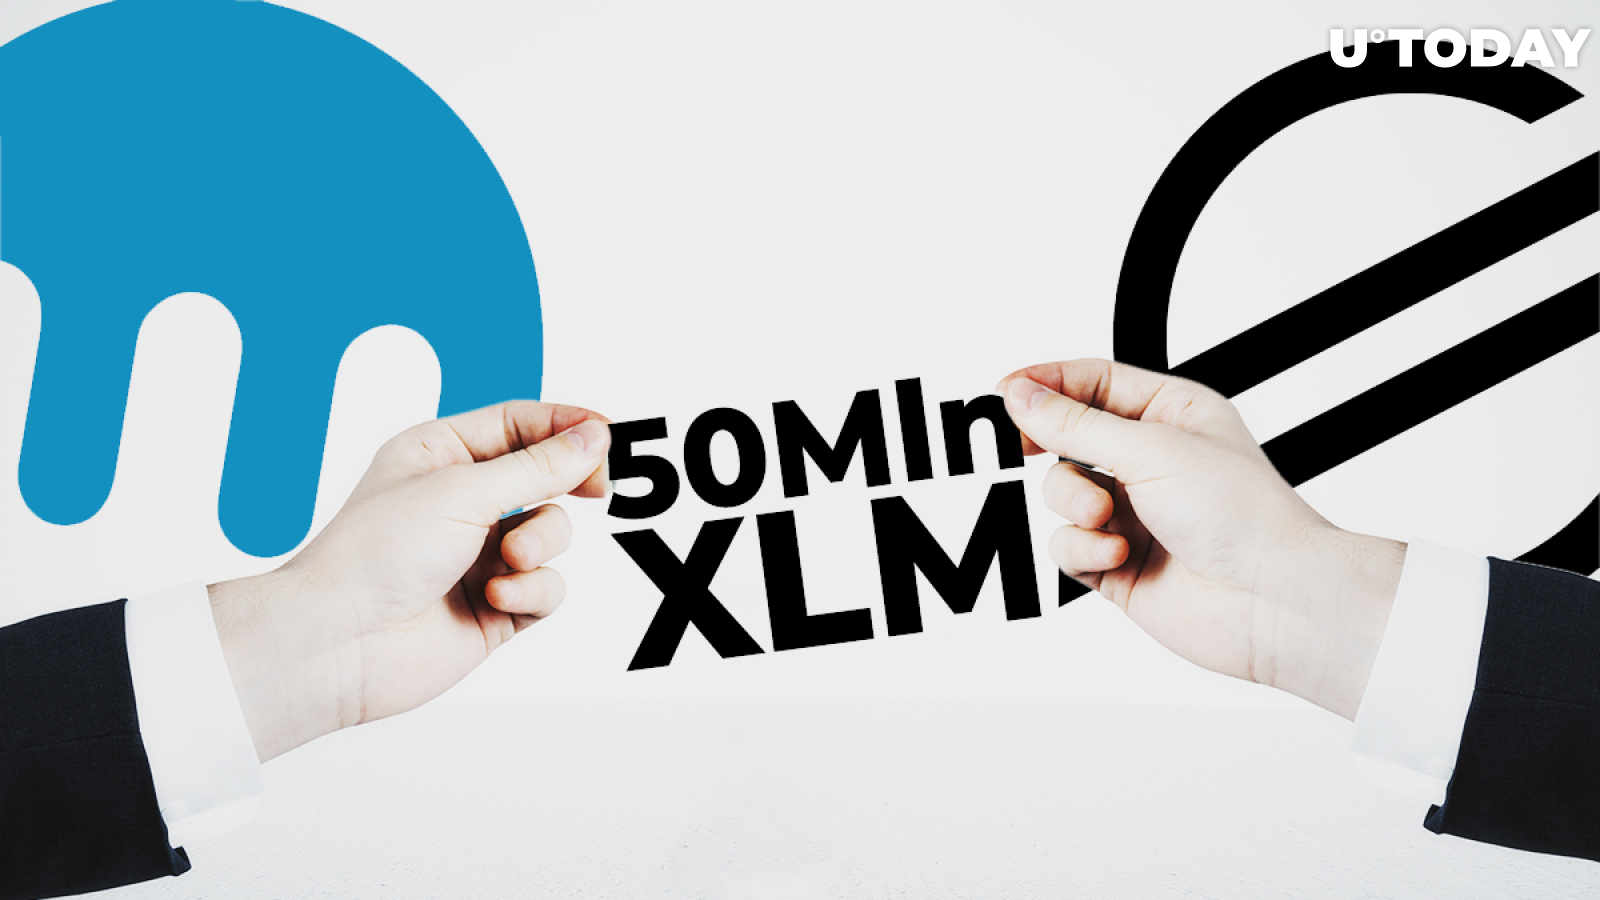 50 Mln XLM Moved From Stellar Development Foundation to Kraken, Community Expects a Dump